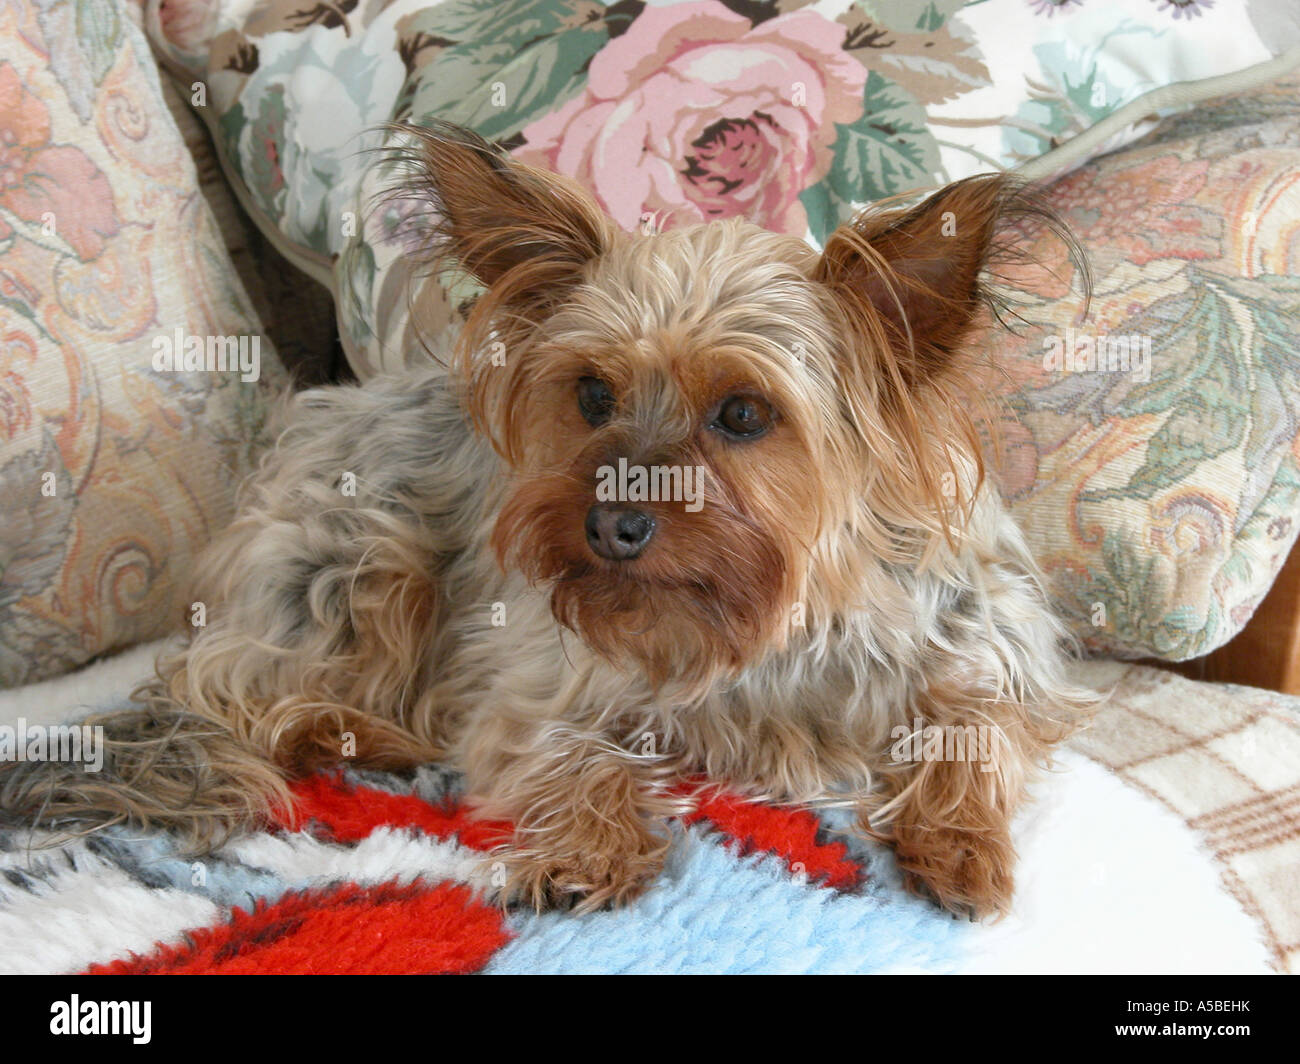 Yorkshire terrier looking cute Stock Photo